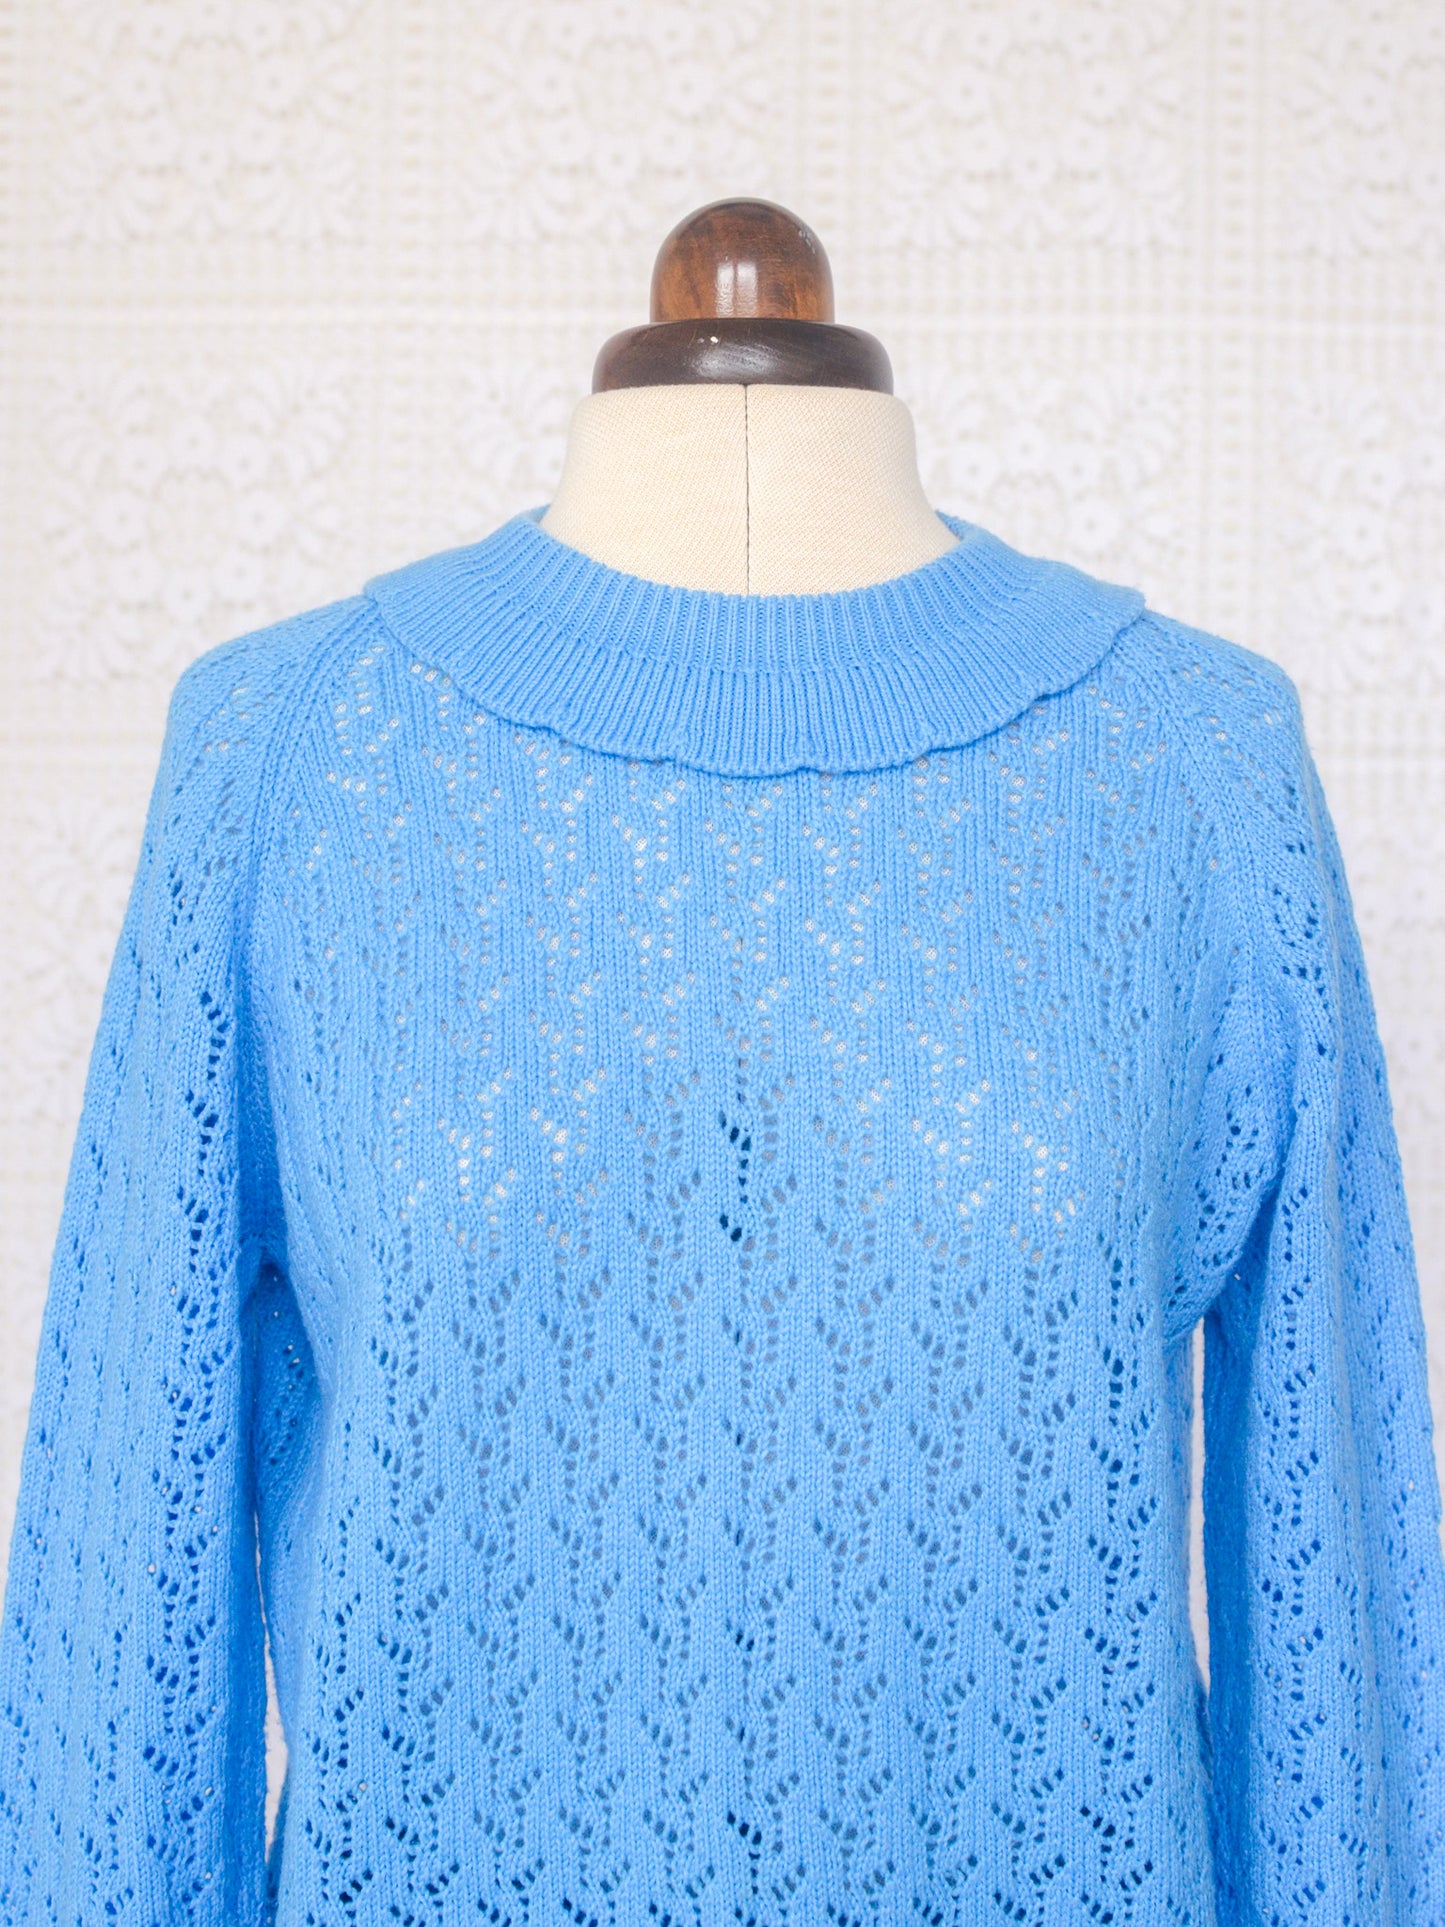 1970s style blue handmade lace knit long sleeve jumper with frill collar